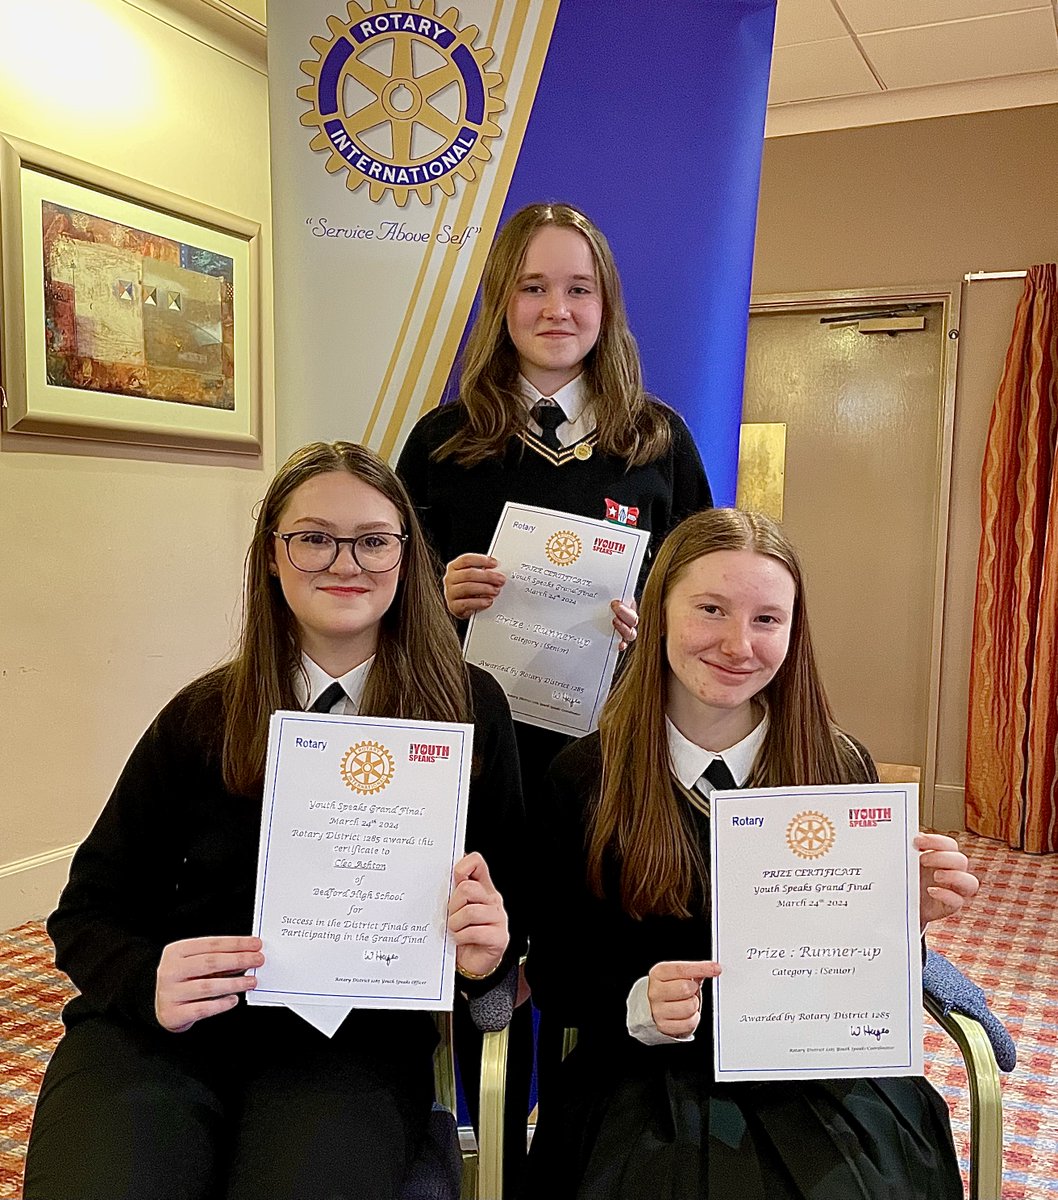 We are proud of our Senior Public speaking team who have qualified for the North of England Grand Final of the Rotary Youth speaks competition. Kaitlyn, Cleo, and Abigail mesmerised the judges in the Northwest Final. We wish them further success in the Grand Final!